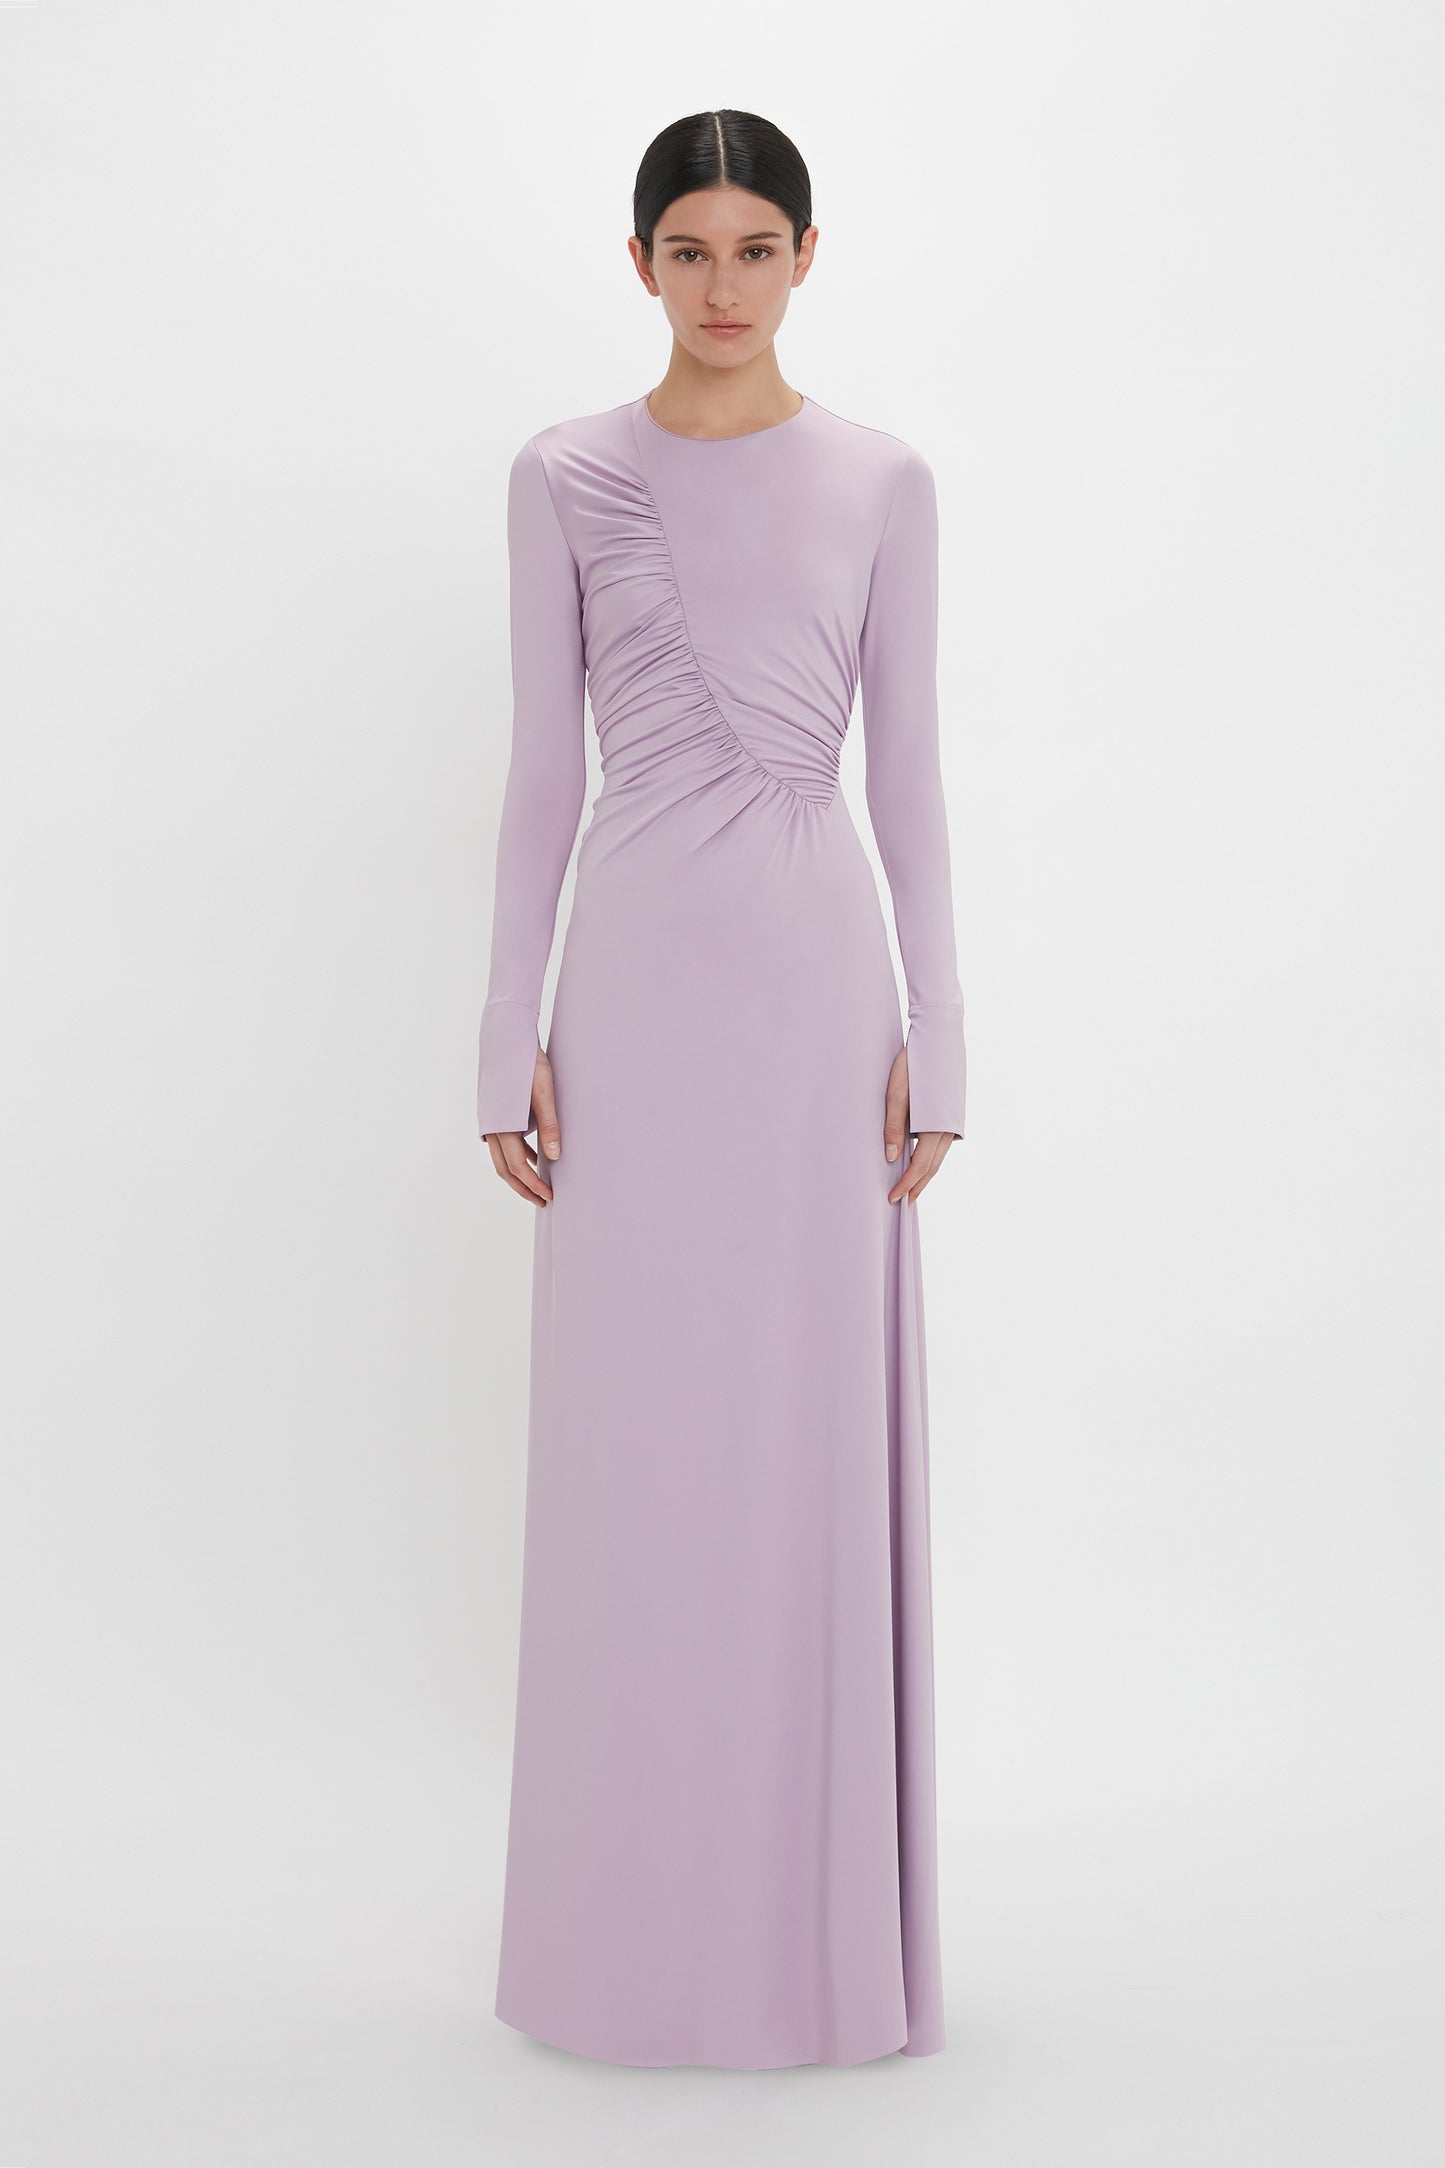 A person stands wearing a long-sleeved, floor-length light purple Ruched Detail Floor-Length Gown In Petunia by Victoria Beckham, crafted from stretch jersey fabric for understated glamour. The gathered detail on the right side adds a touch of elegance against the plain white background.